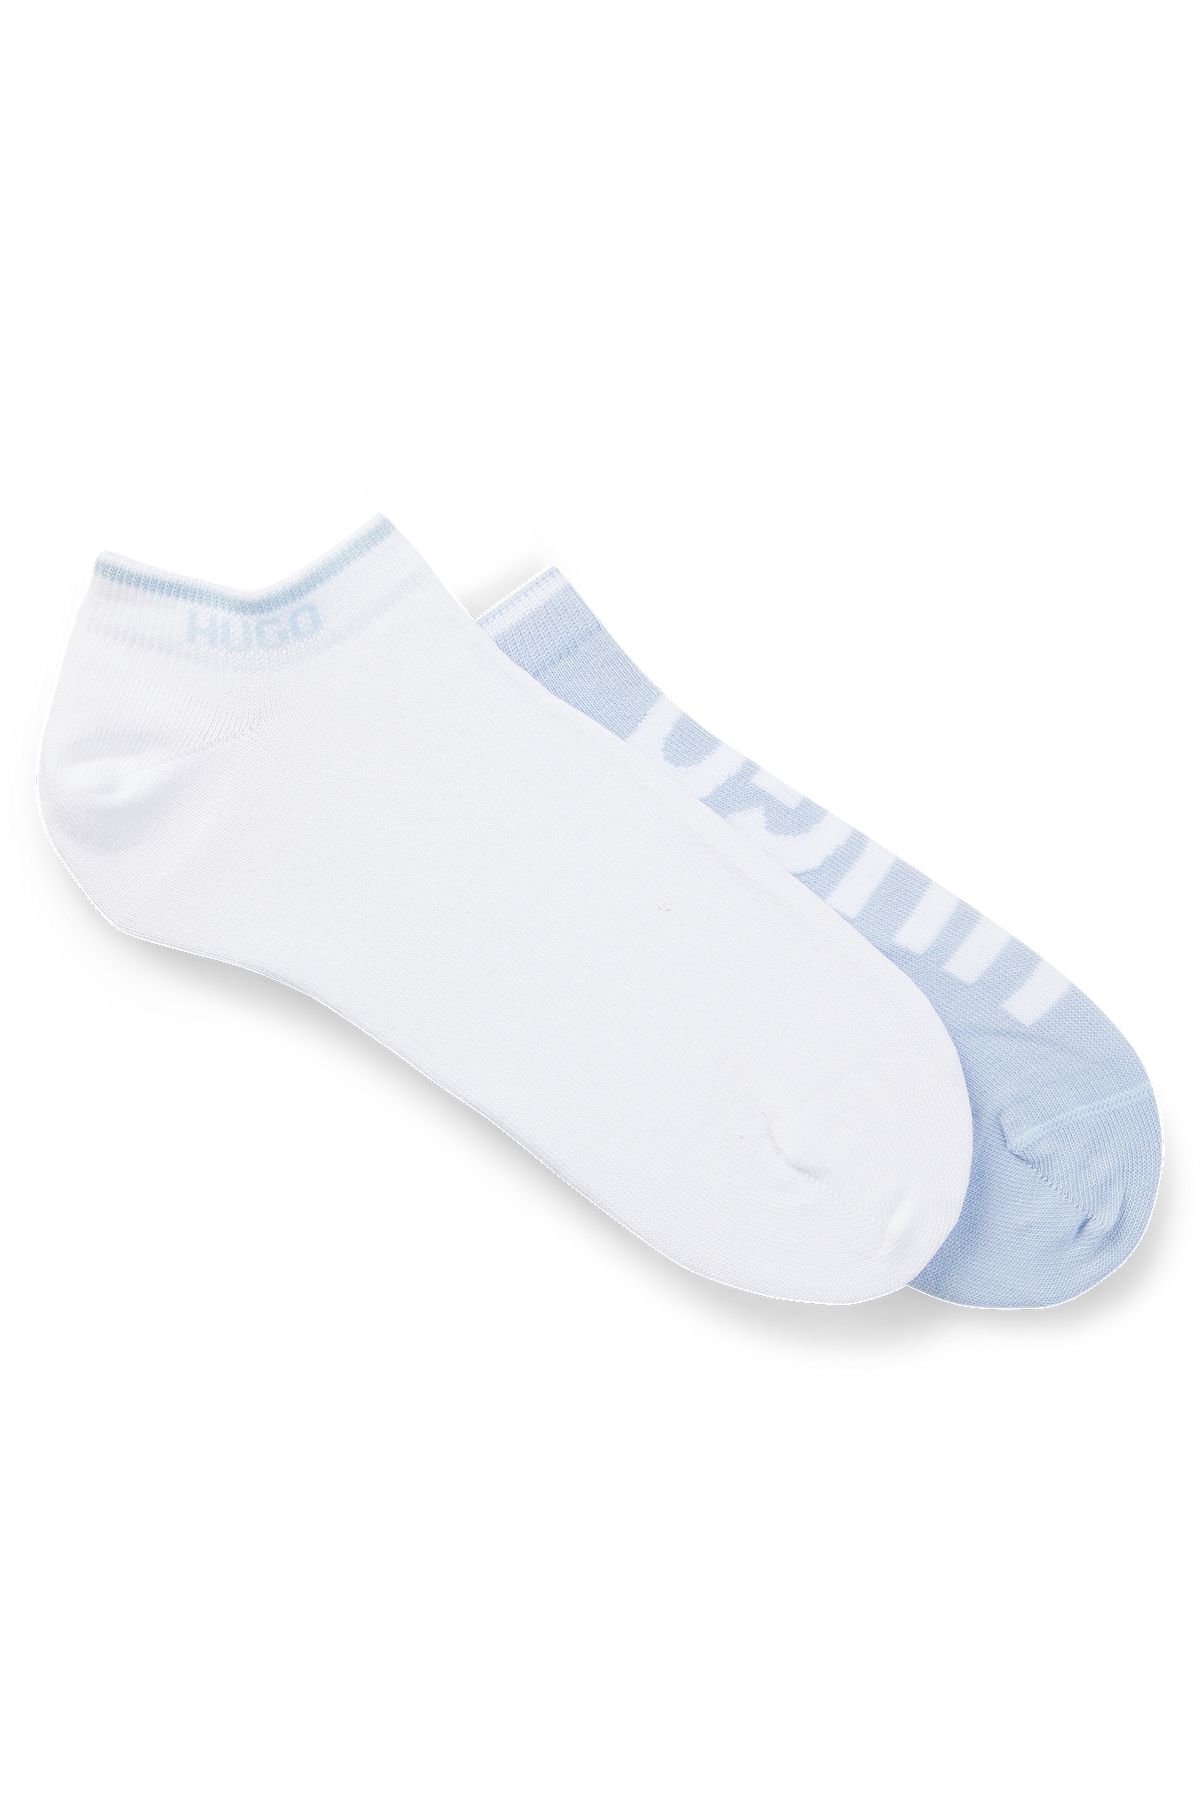 Two-pack of ankle socks with logo details, Assorted-Pre-Pack